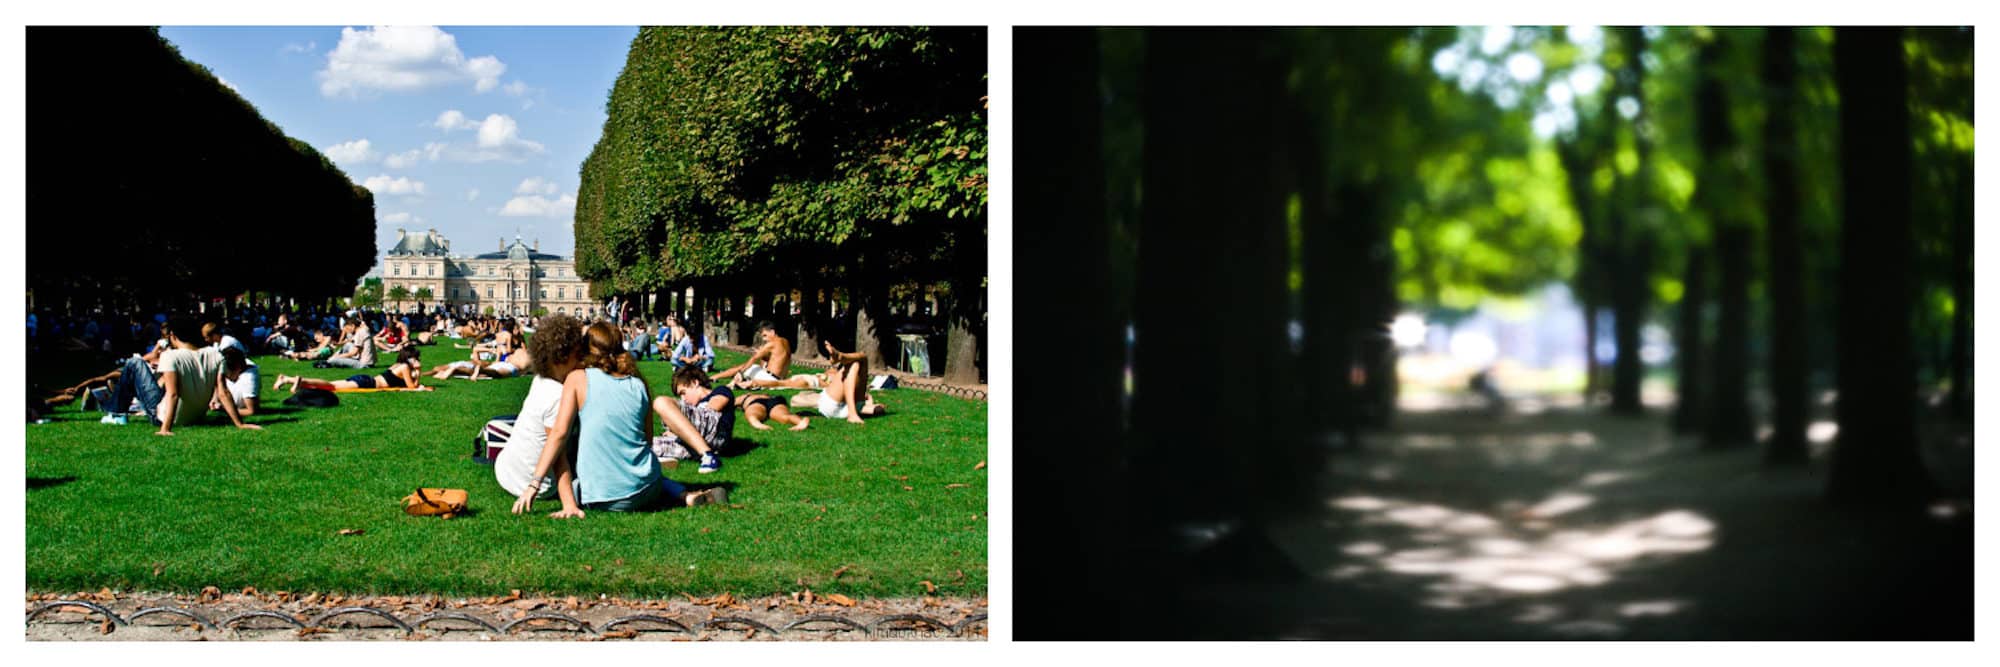 One of the best places to tan in Paris in summer is the Jardin de Luxembourg for its stretch of lawns (left) and tucked-away corners in the shade of swaying trees (right).